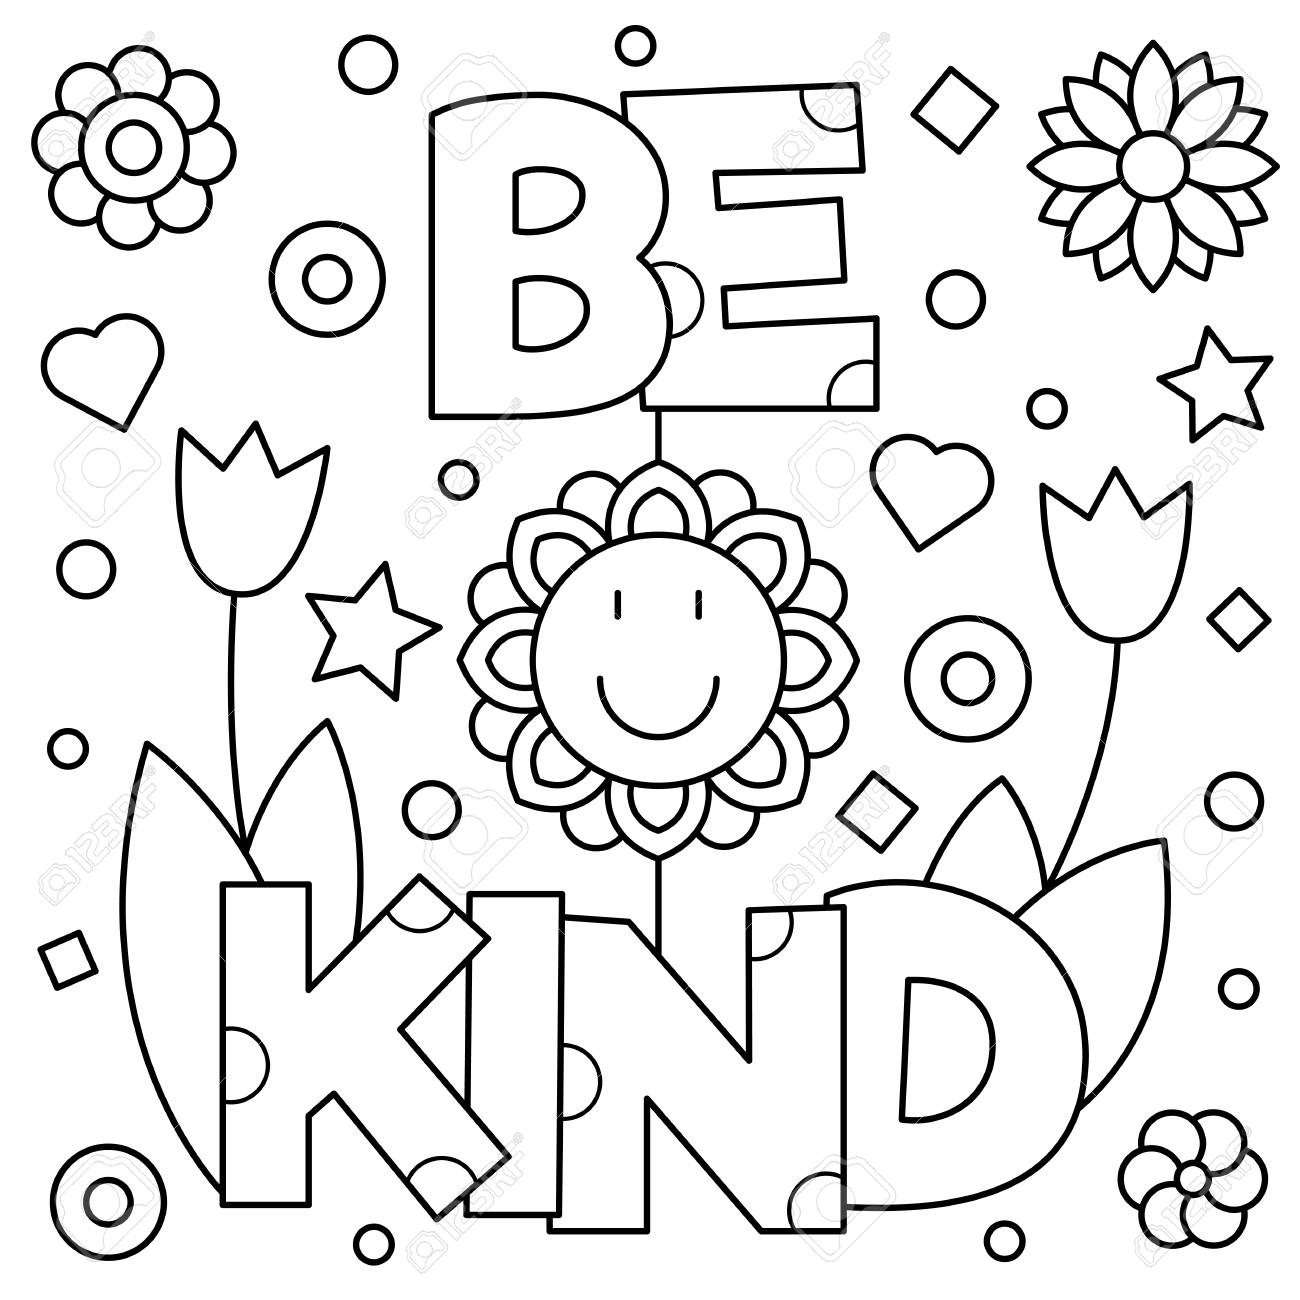 898 Unicorn Be Kind Printable Coloring Page with disney character